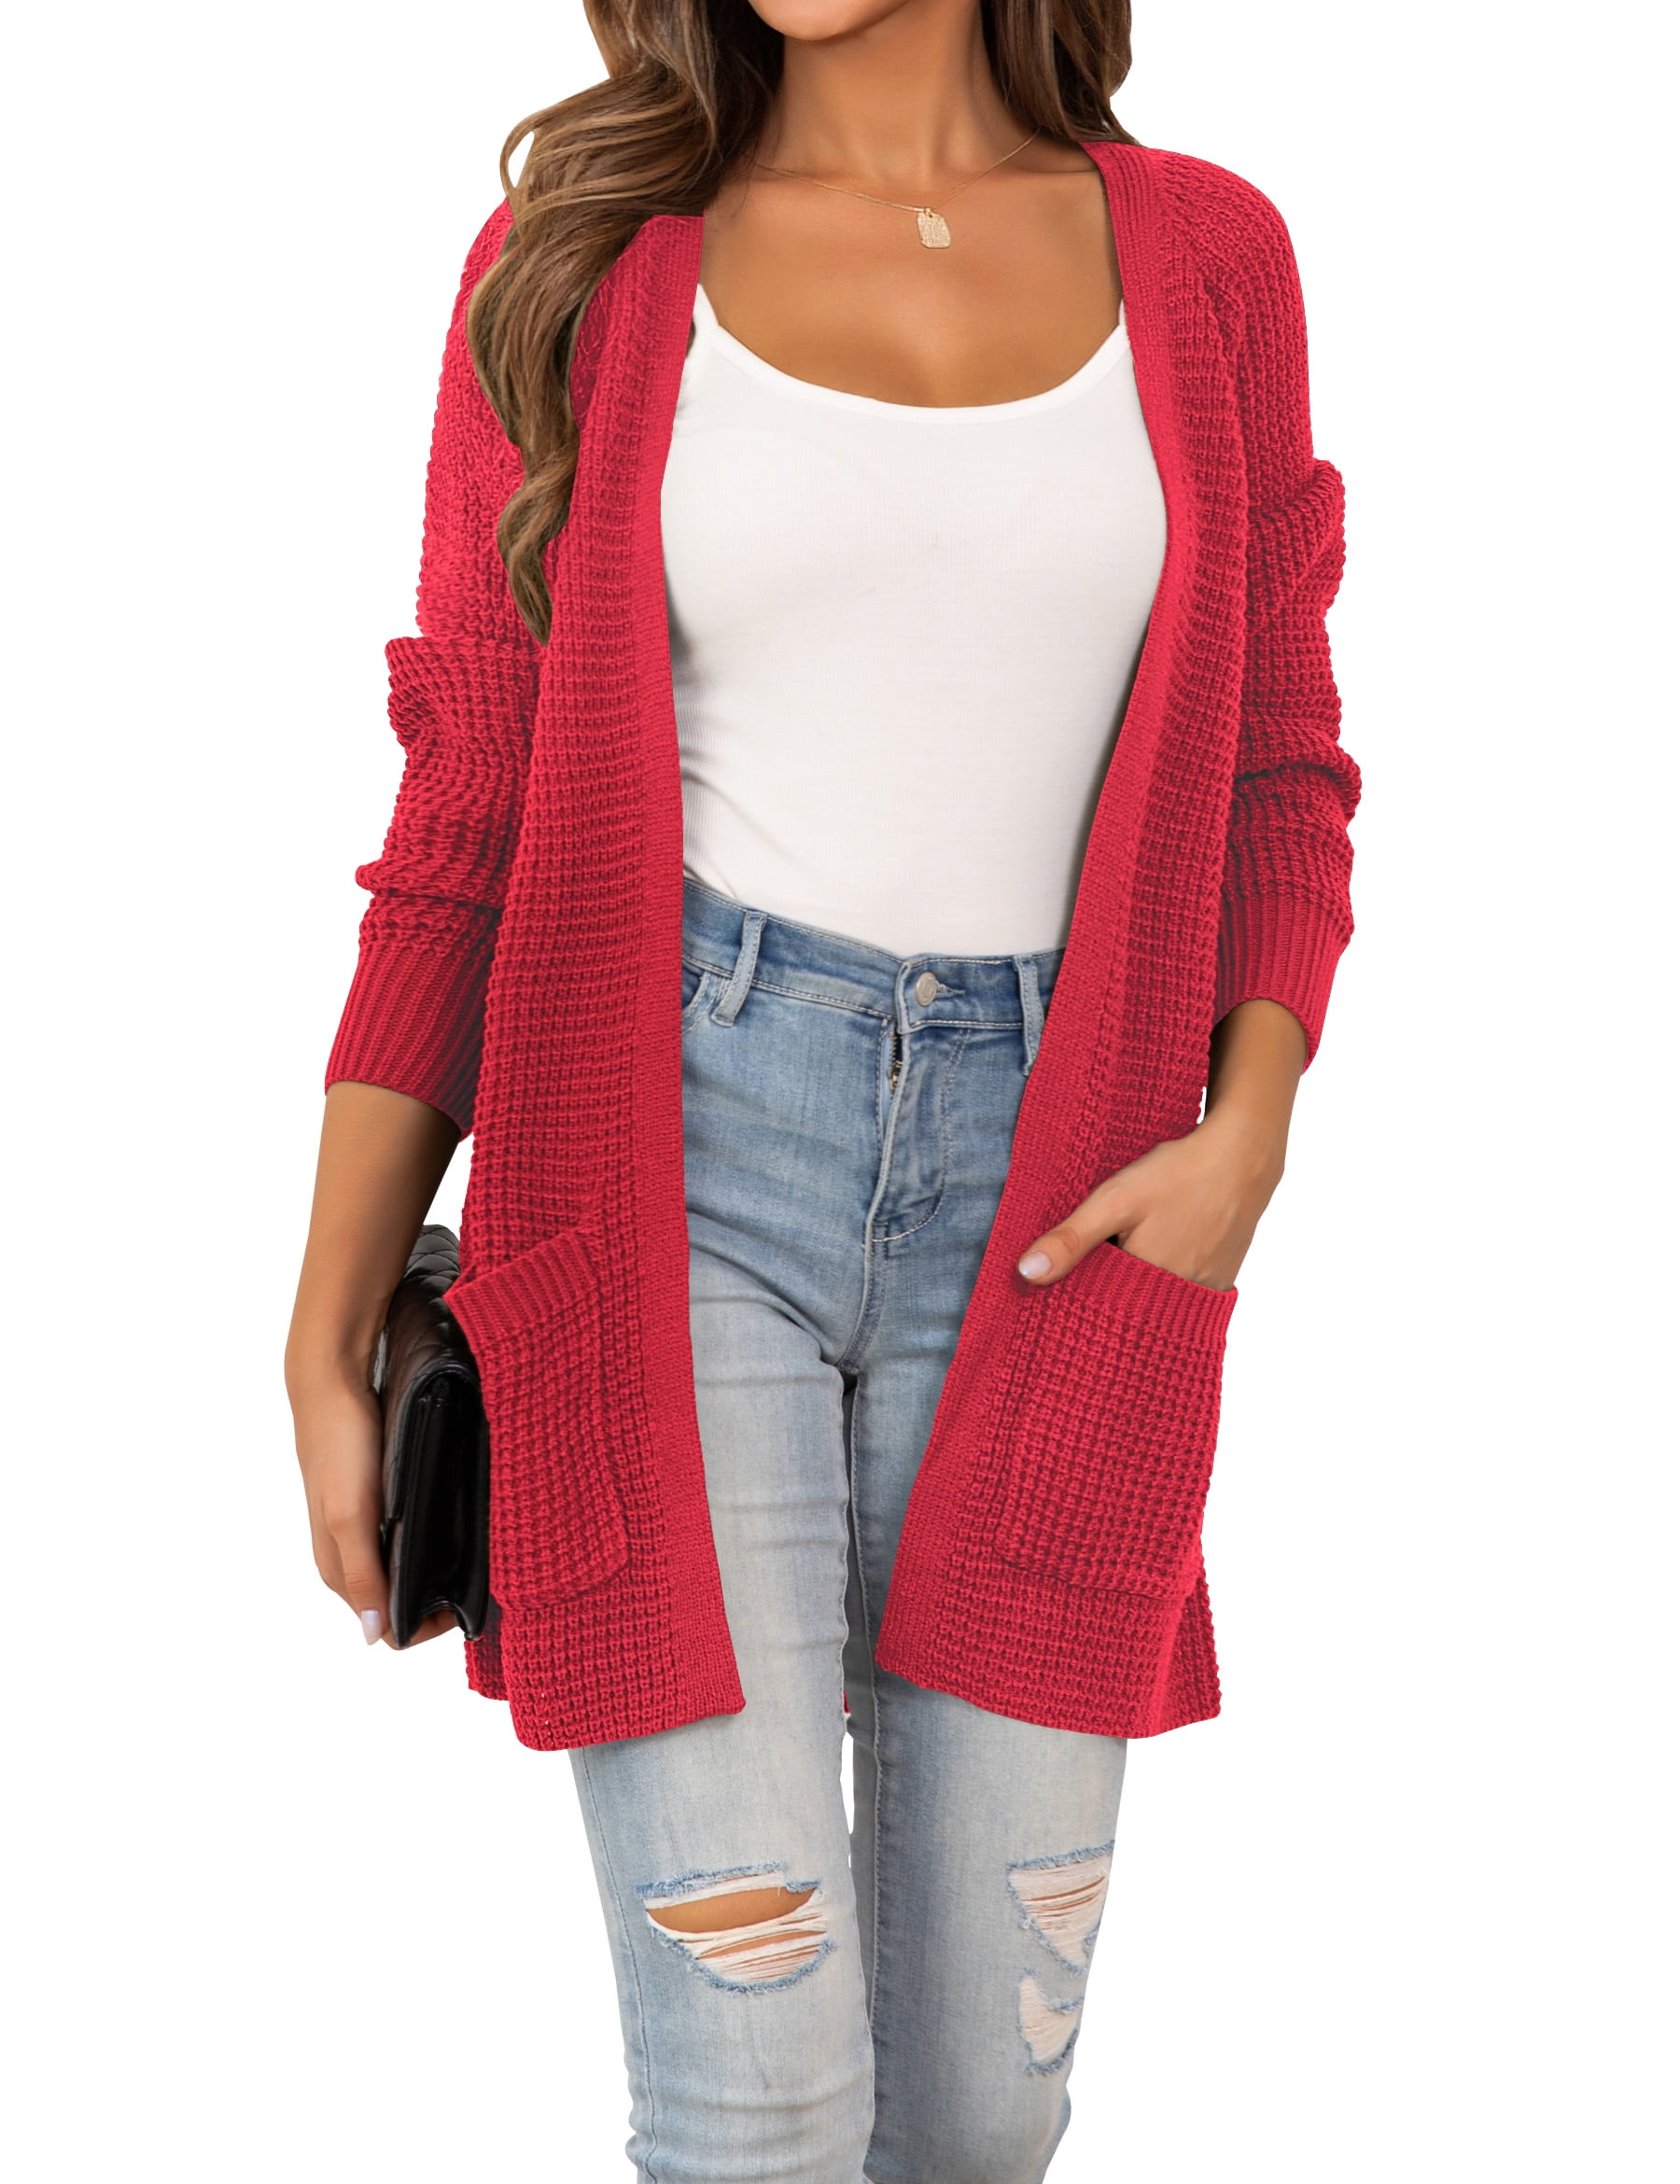 CPOKRTWSO Women's Cardigan Open Front with Pockets Autumn Long Sleeve ...